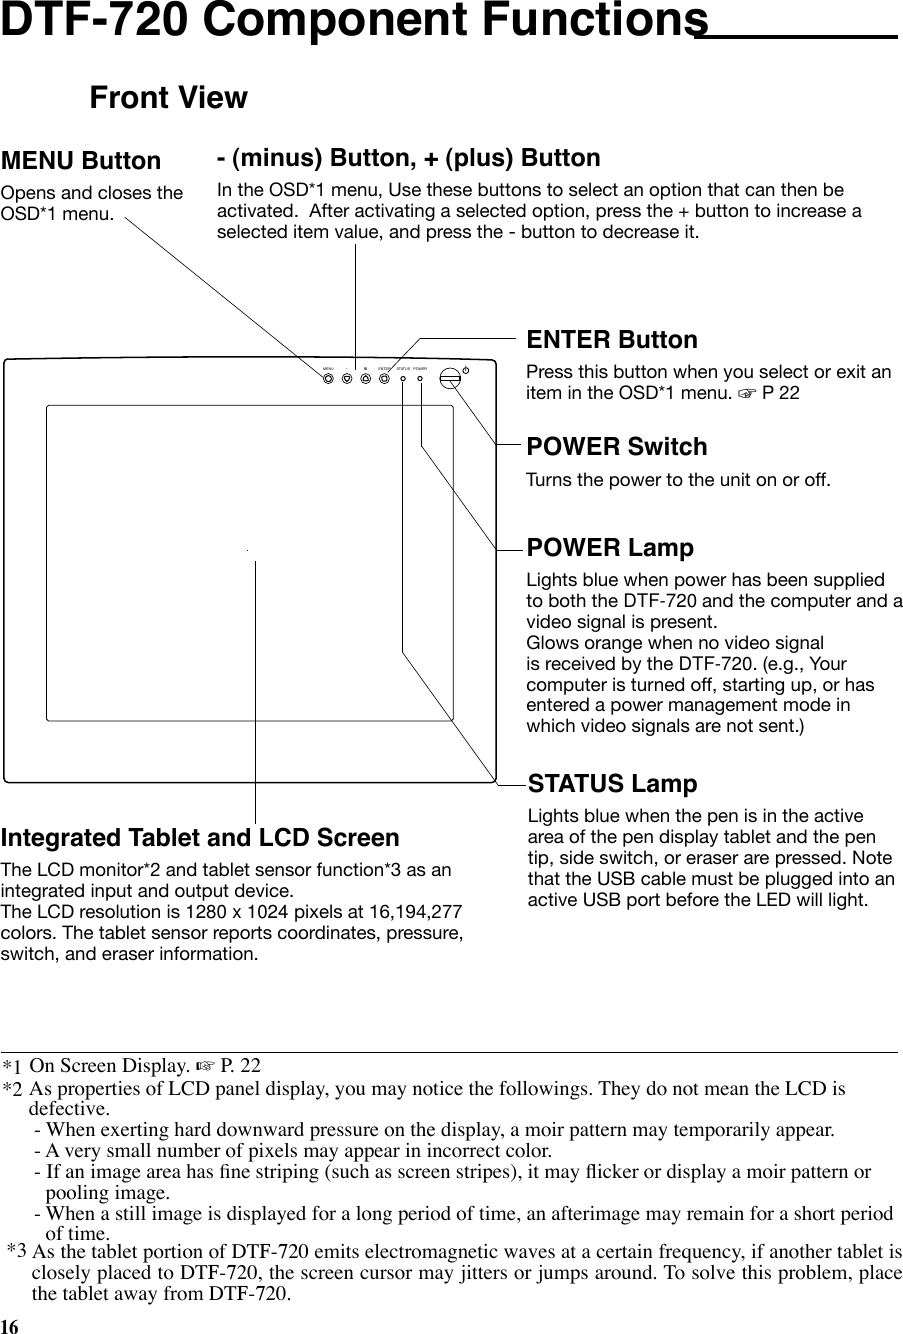 16As the tablet portion of DTF-720 emits electromagnetic waves at a certain frequency, if another tablet is closely placed to DTF-720, the screen cursor may jitters or jumps around. To solve this problem, place the tablet away from DTF-720.Front ViewAs properties of LCD panel display, you may notice the followings. They do not mean the LCD is defective. - When exerting hard downward pressure on the display, a moir pattern may temporarily appear. - A very small number of pixels may appear in incorrect color.  - If an image area has ﬁne striping (such as screen stripes), it may ﬂicker or display a moir pattern or  pooling image. - When a still image is displayed for a long period of time, an afterimage may remain for a short period of time.POWER SwitchTurns the power to the unit on or off. POWERSTATUSENTEREN-MENU*2 DTF-720 Component Functions     POWER LampLights blue when power has been supplied to both the DTF-720 and the computer and a video signal is present.Glows orange when no video signal is received by the DTF-720. (e.g., Your computer is turned off, starting up, or has entered a power management mode in which video signals are not sent.)STATUS LampLights blue when the pen is in the active area of the pen display tablet and the pen tip, side switch, or eraser are pressed. Note that the USB cable must be plugged into an active USB port before the LED will light.ENTER ButtonPress this button when you select or exit an item in the OSD*1 menu. ☞ P 22- (minus) Button, + (plus) ButtonIn the OSD*1 menu, Use these buttons to select an option that can then be activated.  After activating a selected option, press the + button to increase a selected item value, and press the - button to decrease it.MENU ButtonOpens and closes the OSD*1 menu.Integrated Tablet and LCD ScreenThe LCD monitor*2 and tablet sensor function*3 as an integrated input and output device.The LCD resolution is 1280 x 1024 pixels at 16,194,277 colors. The tablet sensor reports coordinates, pressure, switch, and eraser information.*3 *1 On Screen Display. ☞ P. 22